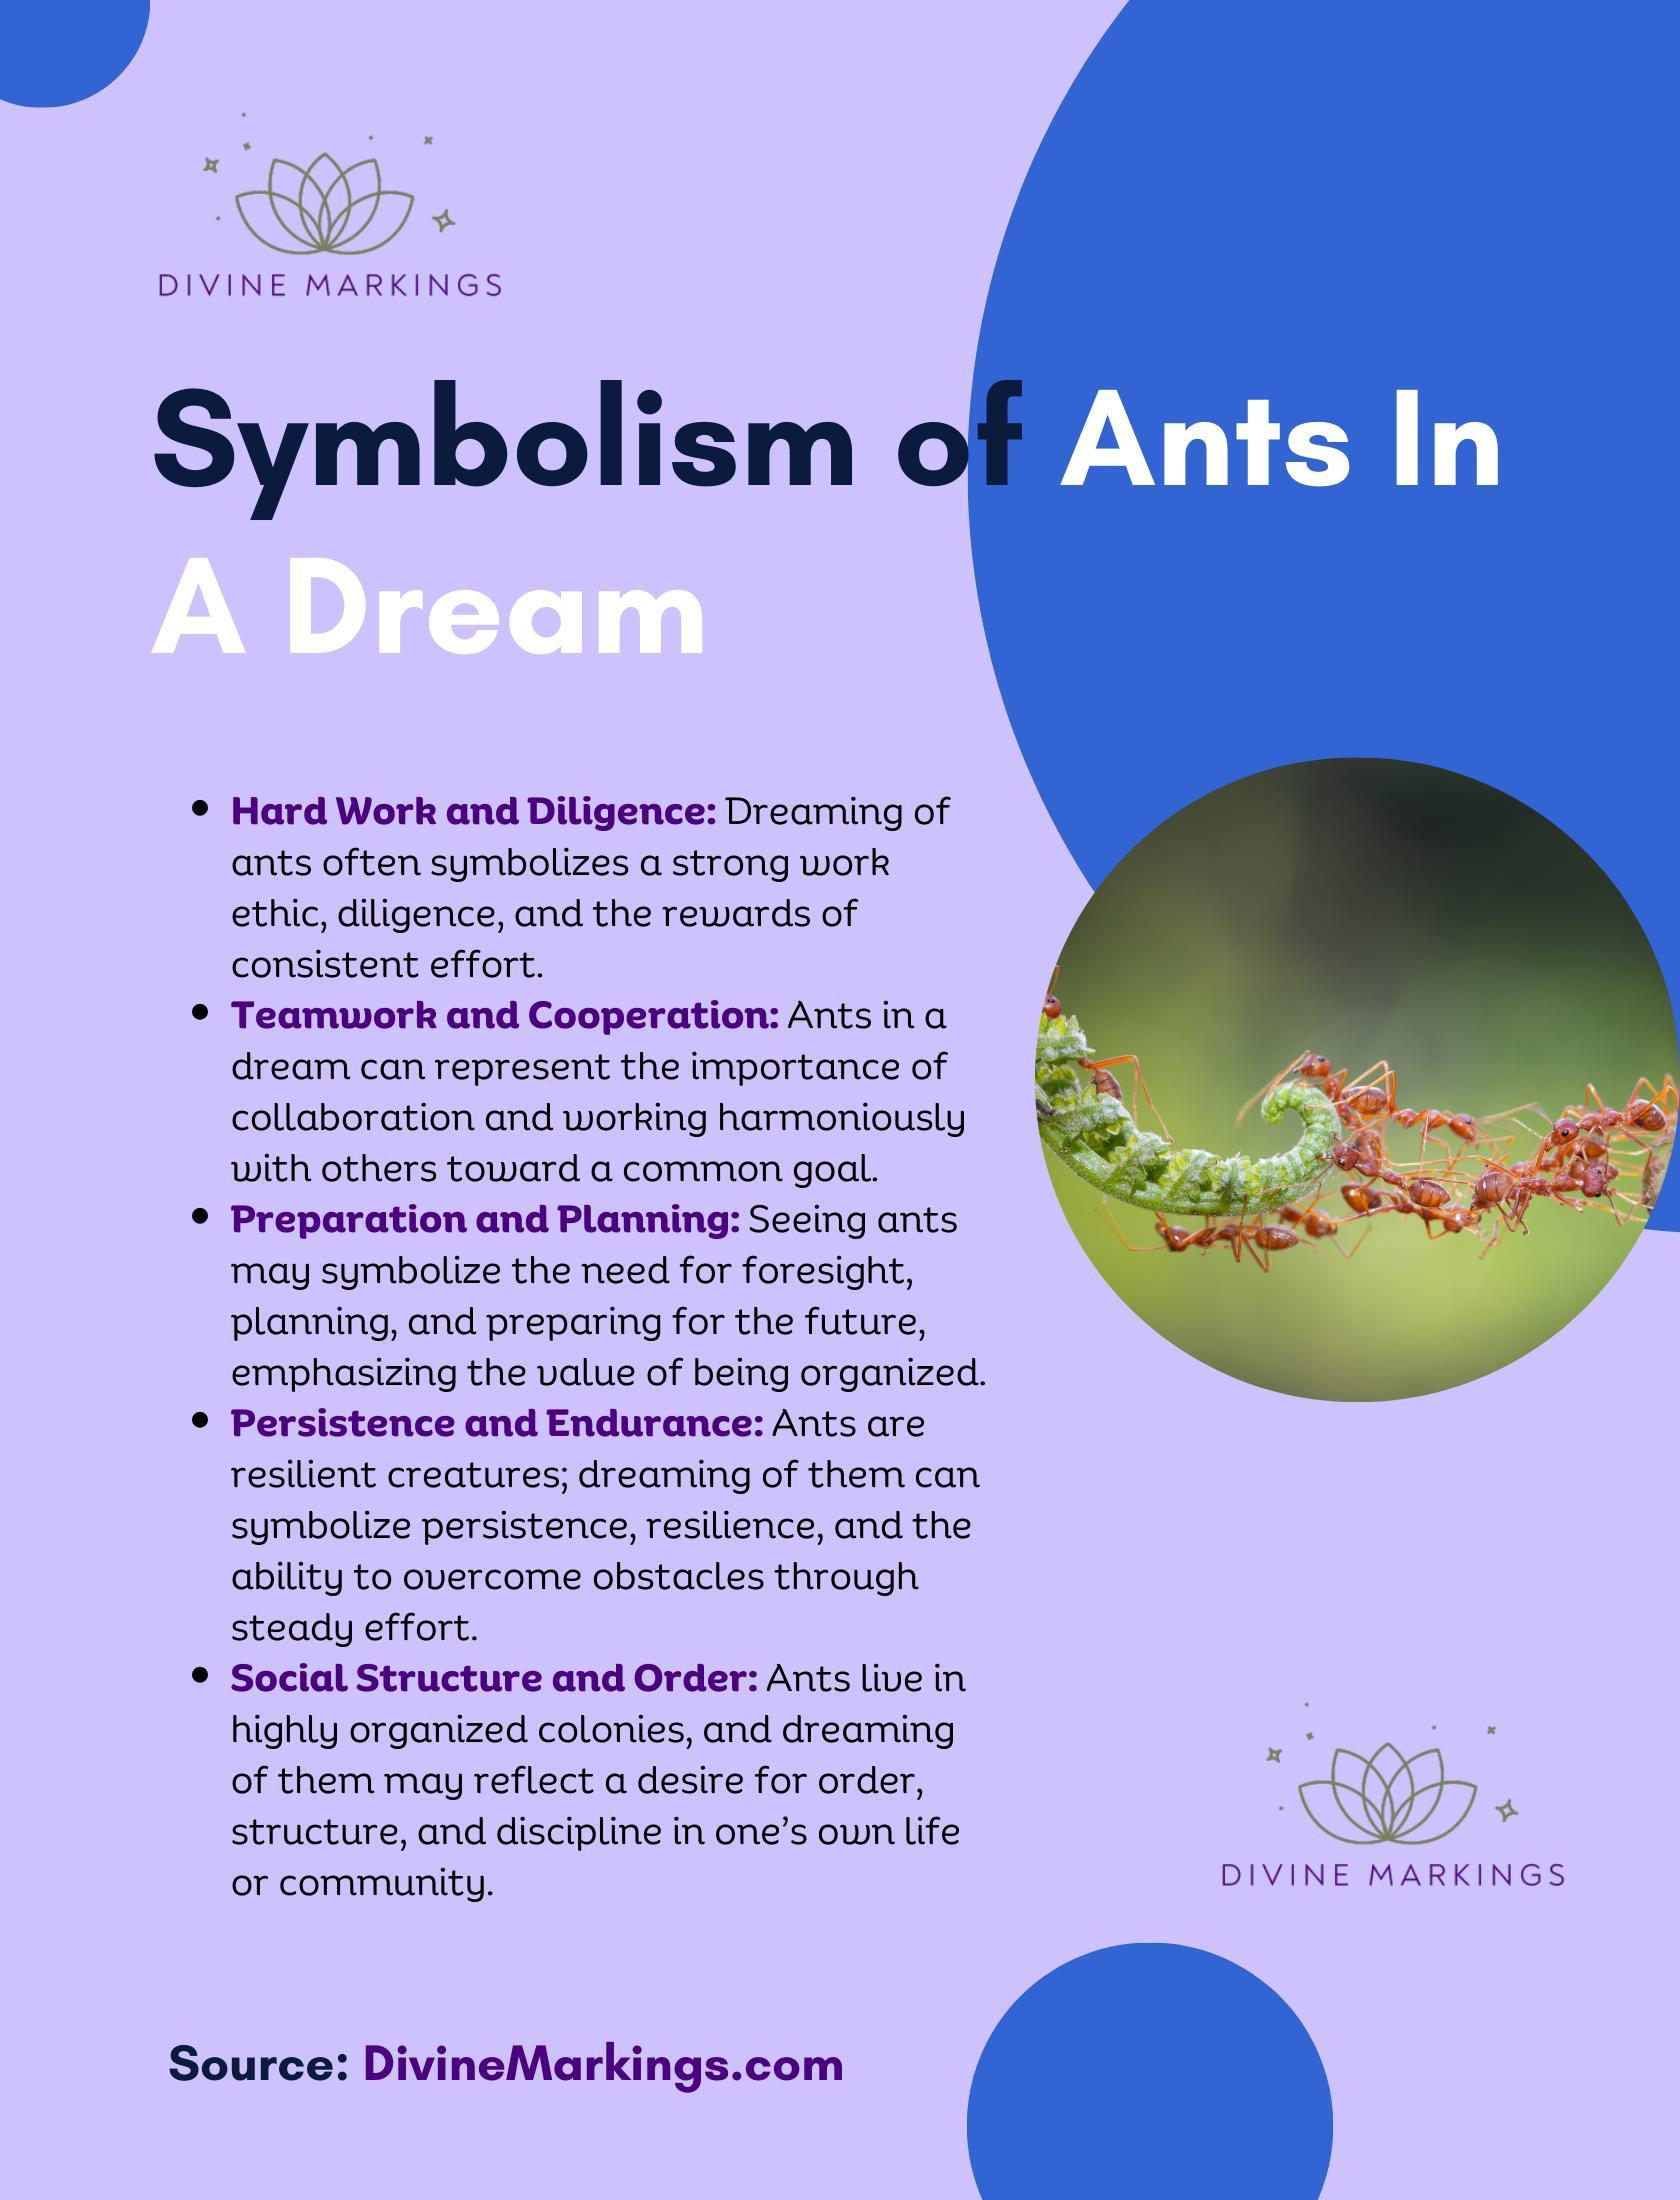 Symbolism of Ants In A Dream Infographic